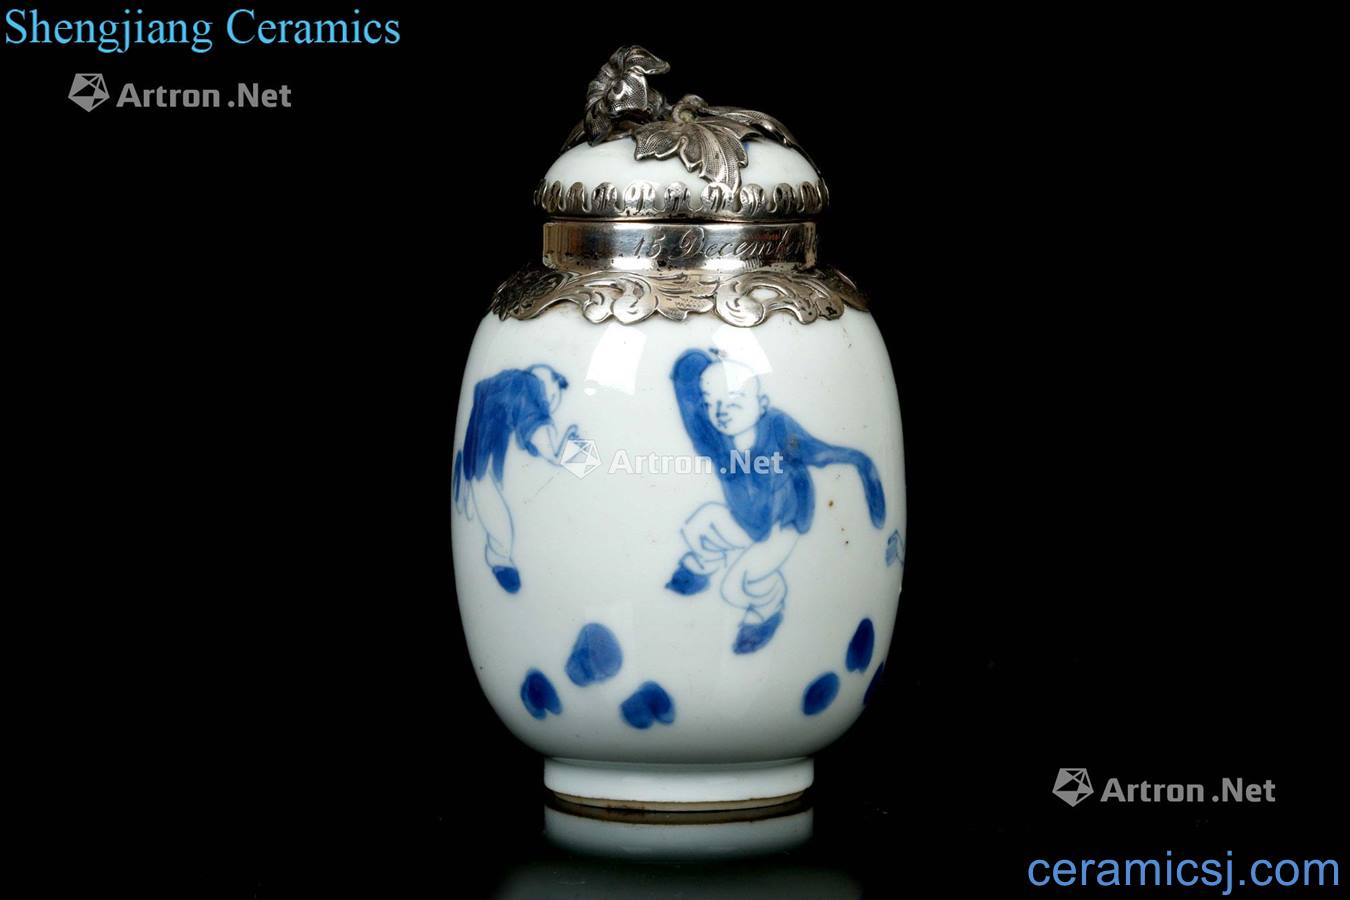 In the qing dynasty blue-and-white silvering the lad caddy